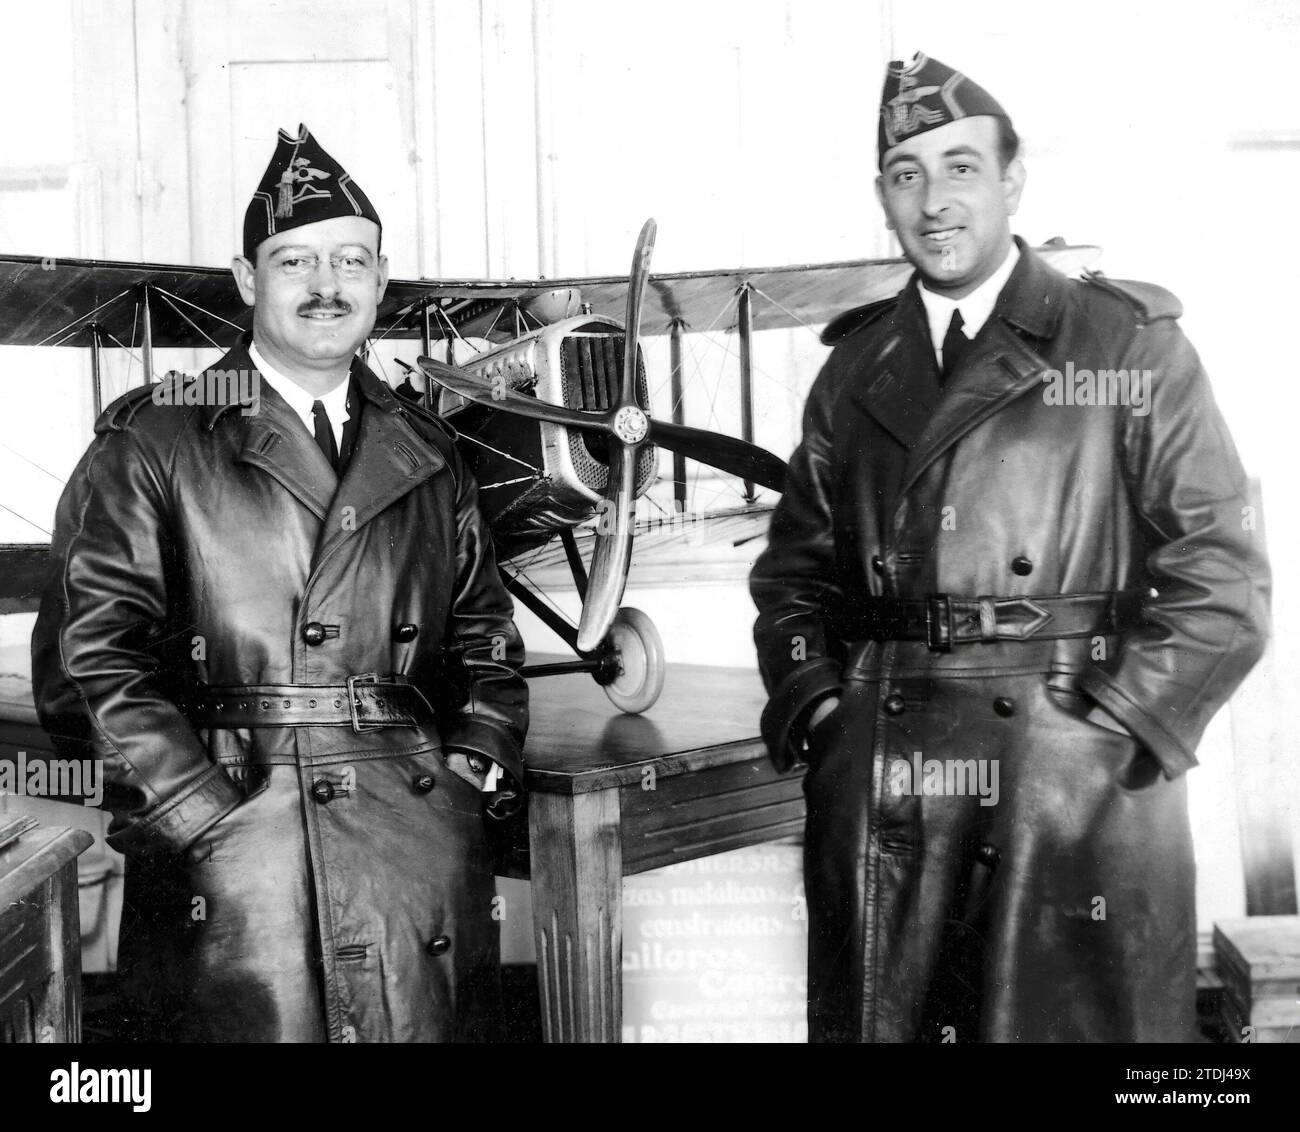 June 1933. Aviation captains D. Mariano Barberán (left) and D. Jacinto Collar (right), who performed a feat when crossing the Atlantic to make the Seville - Mexico crossing. Their plane, the 'Cuatro Vientos', ran out of fuel and the aviators landed in Camagüey, after a flight of 40 hours and 7,600 kilometers, which constituted a world record for several years. The Government of the Republic wanted the trip to reach its destination as soon as possible, so Barberán and Collar resumed the flight in bad weather conditions, which were probably the causes of the disappearance of the 'Cuatro Vientos' Stock Photo